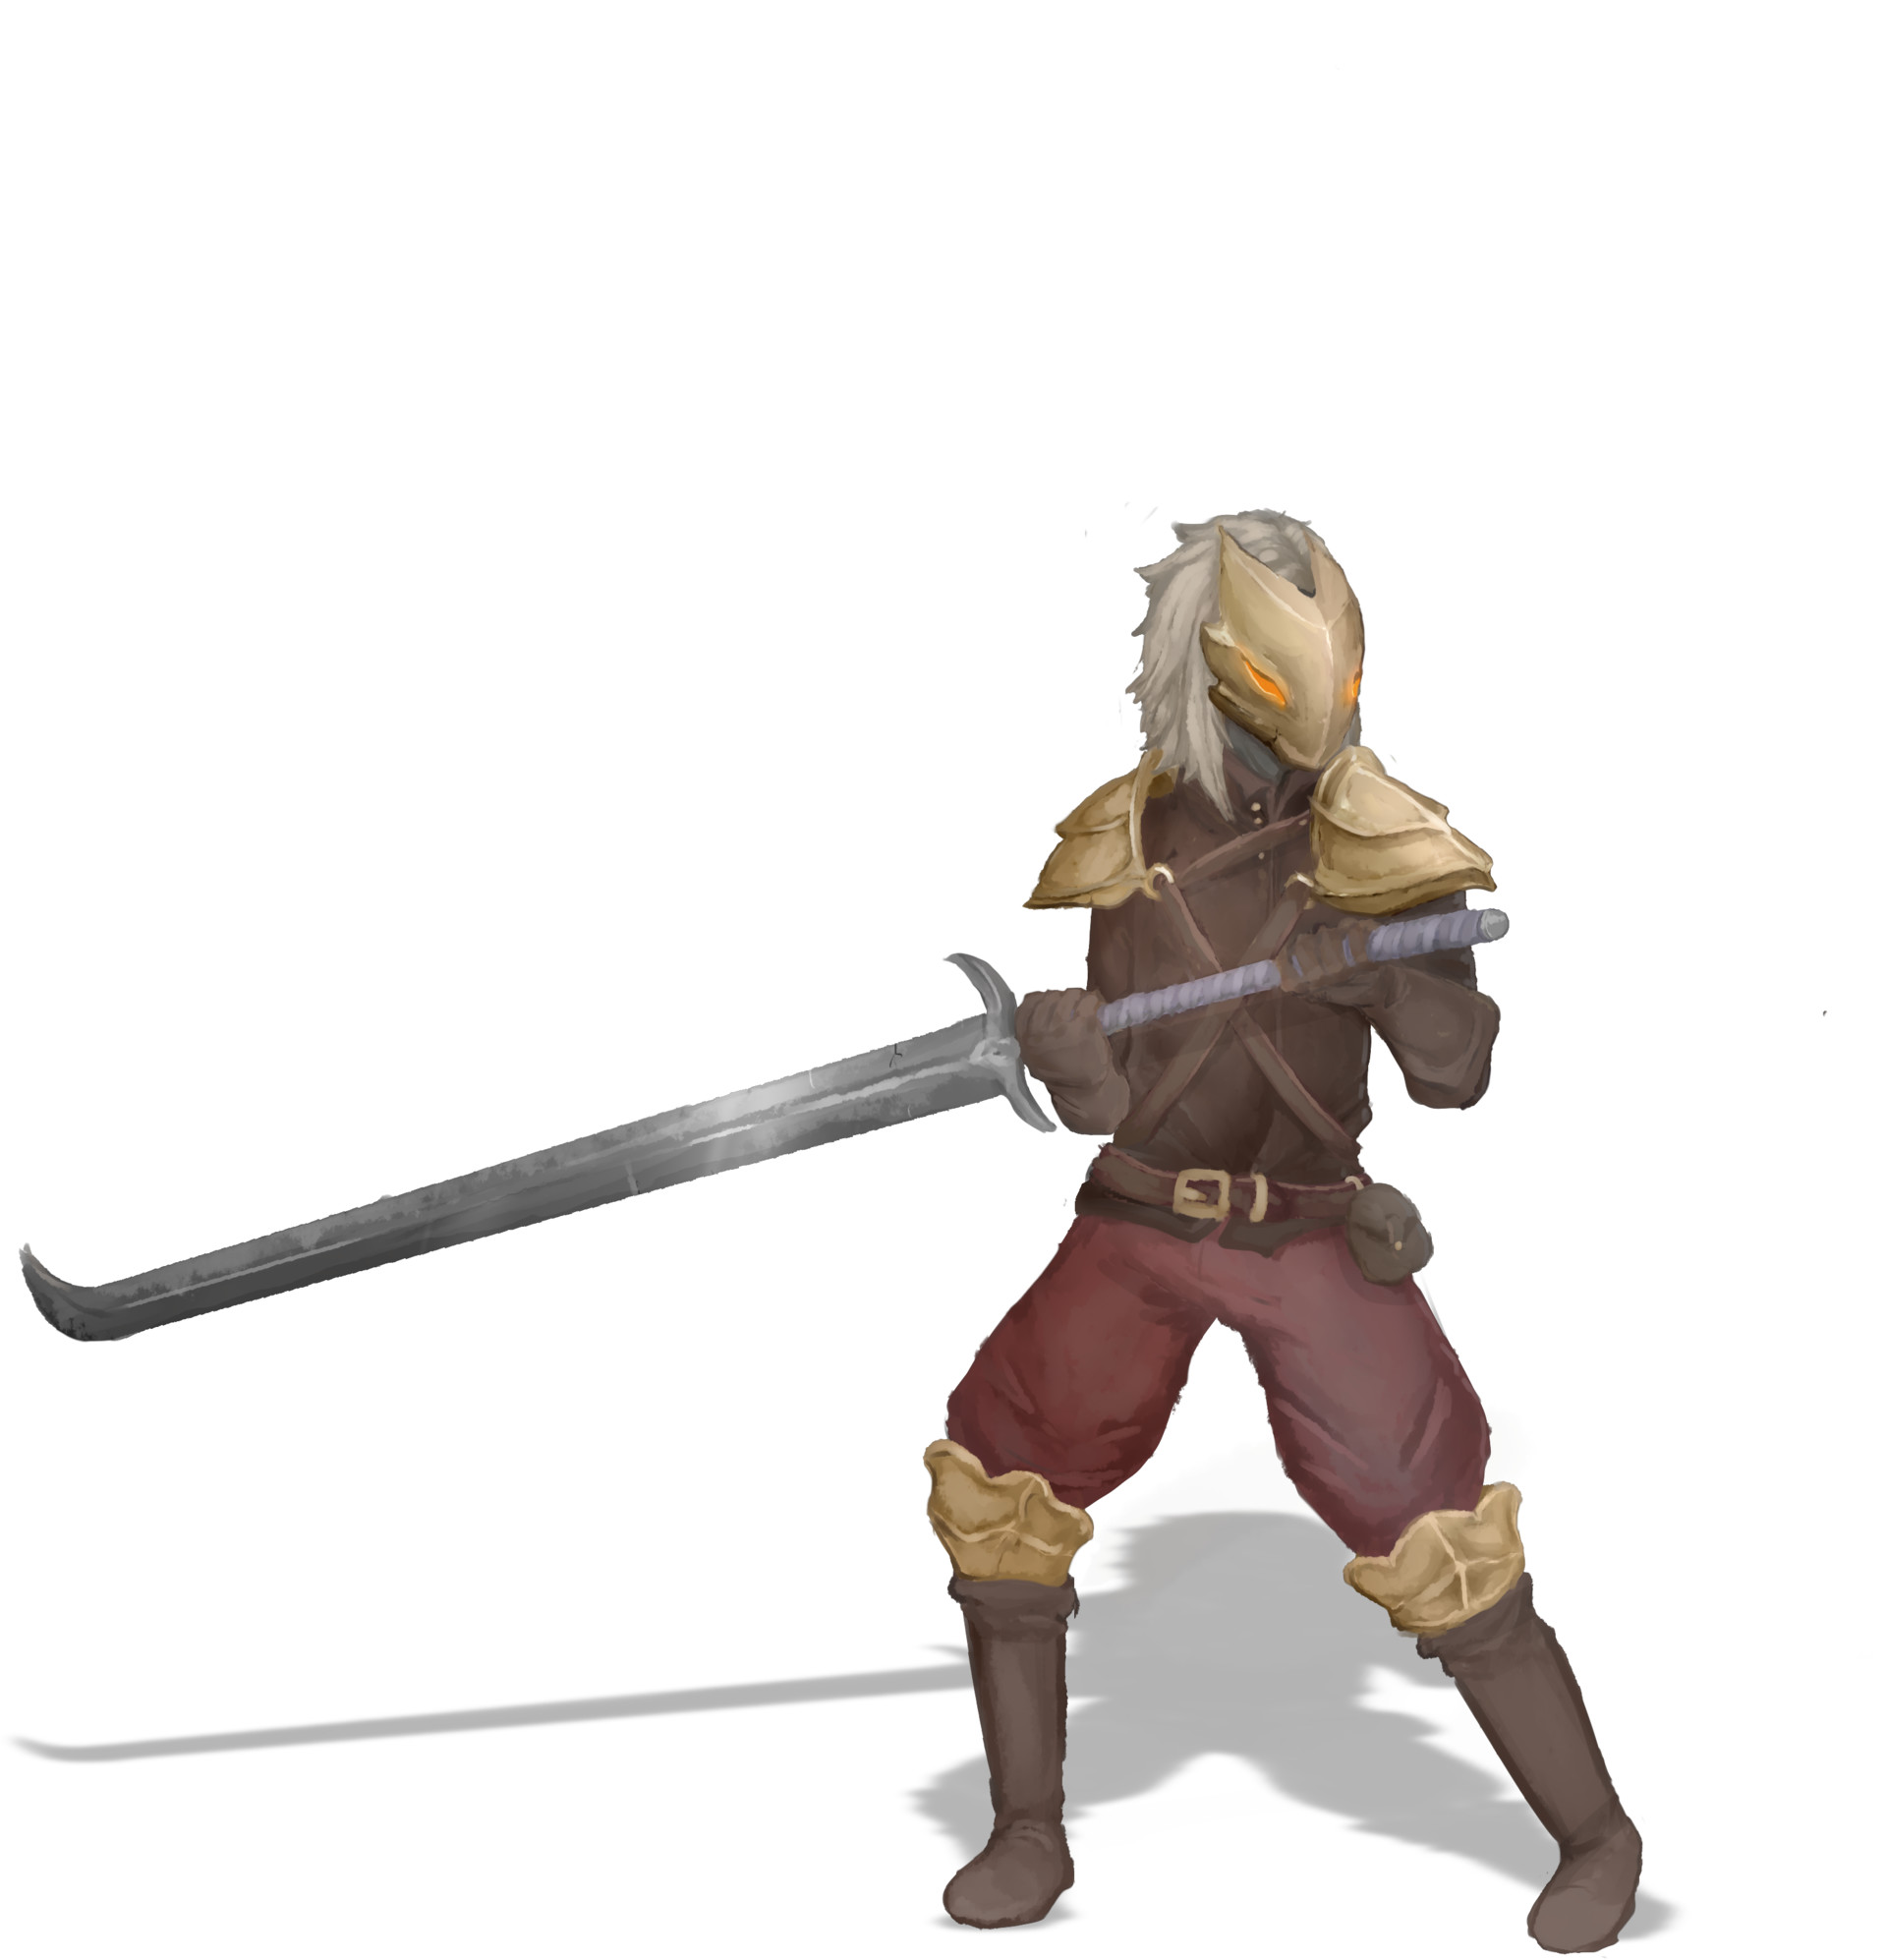 Been playing the game again, here's an Ironclad fanart : r/slaythespire